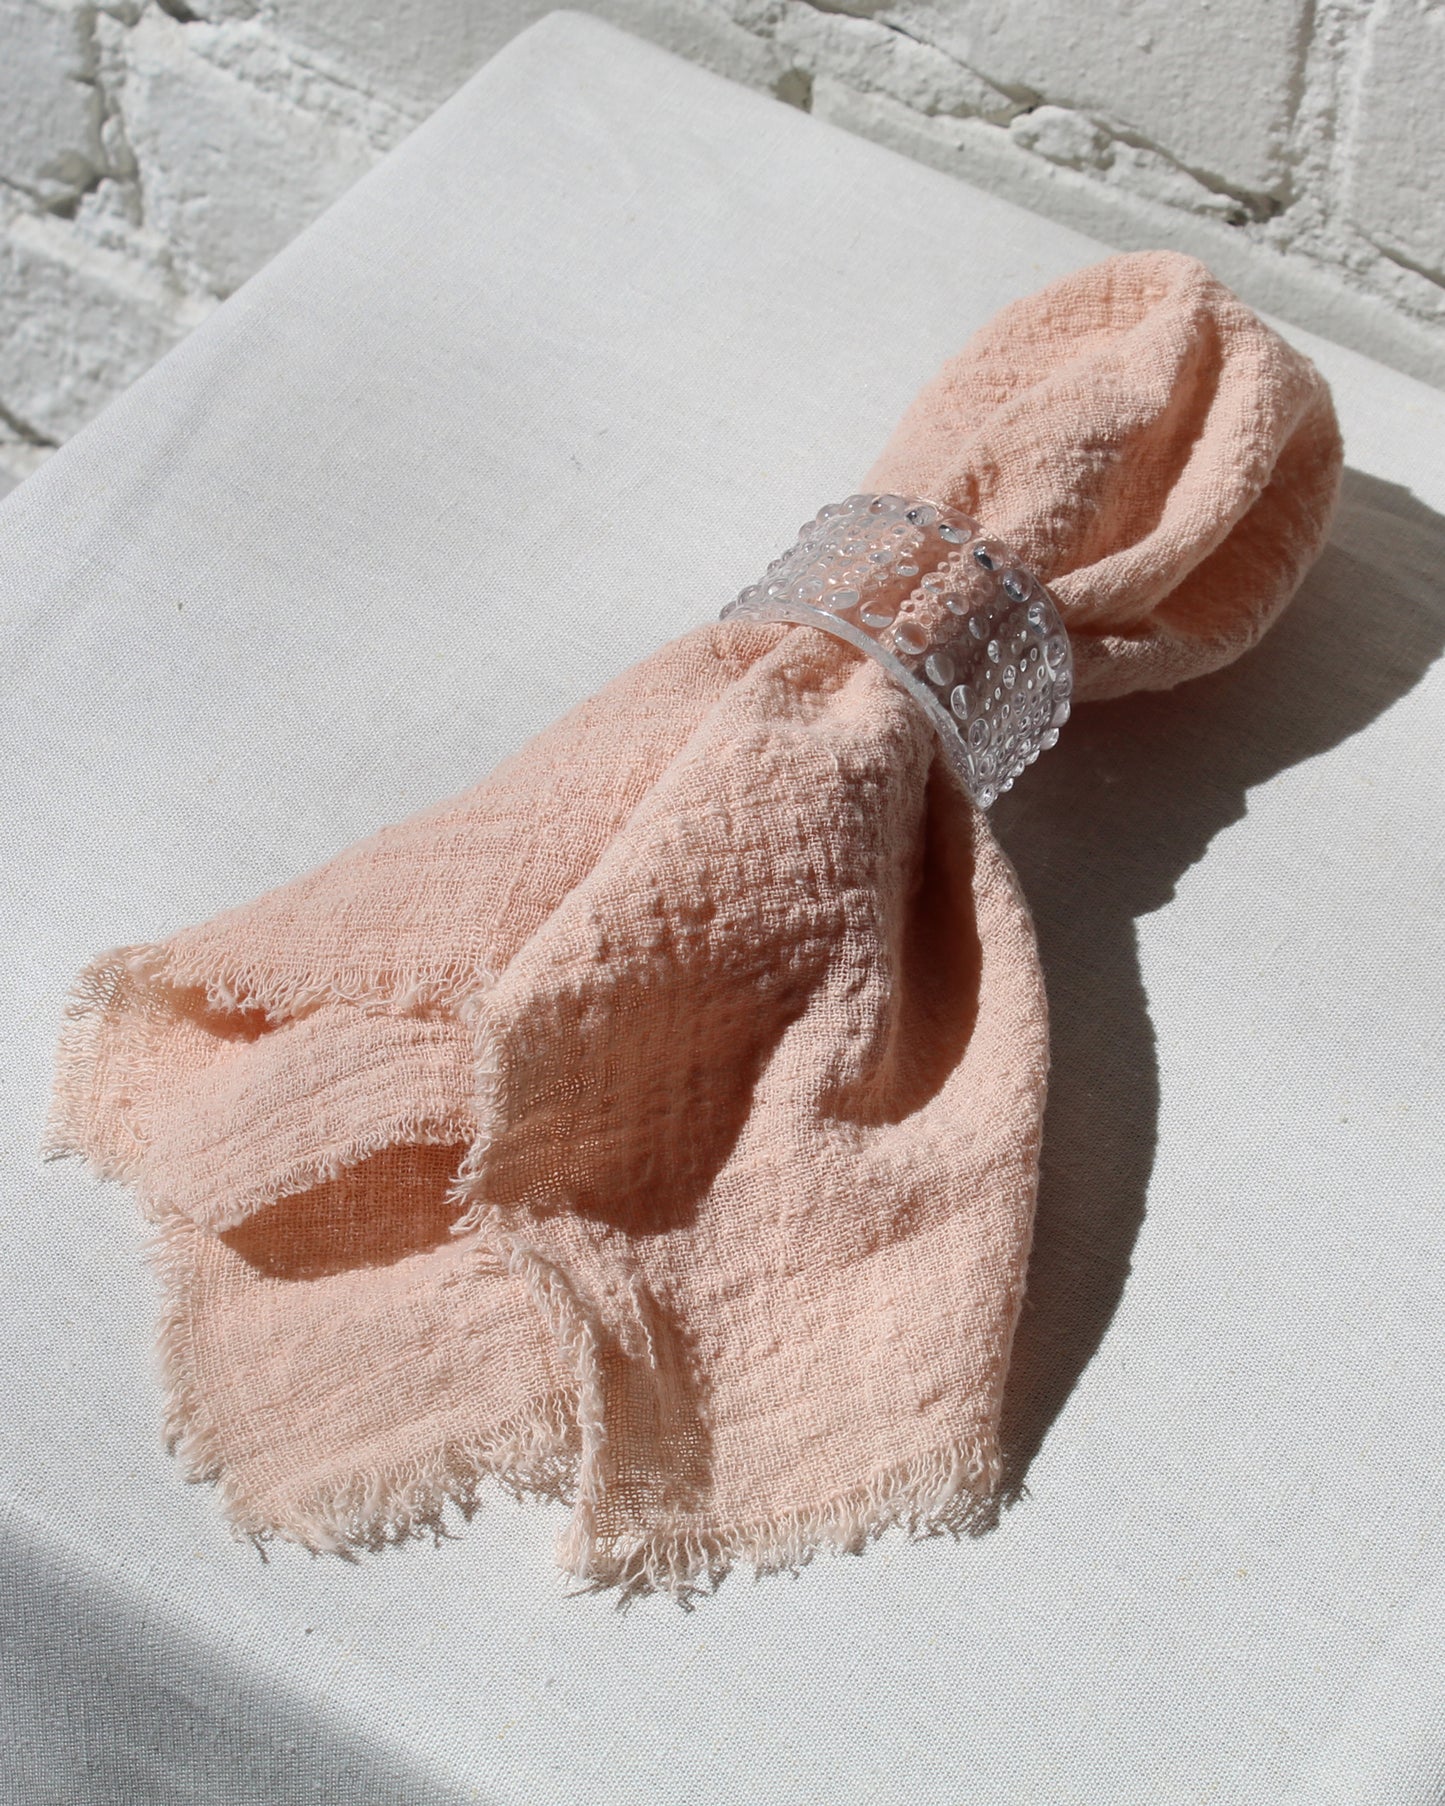 9 CHRISTOPHER Washed Linen Napkin in Peach